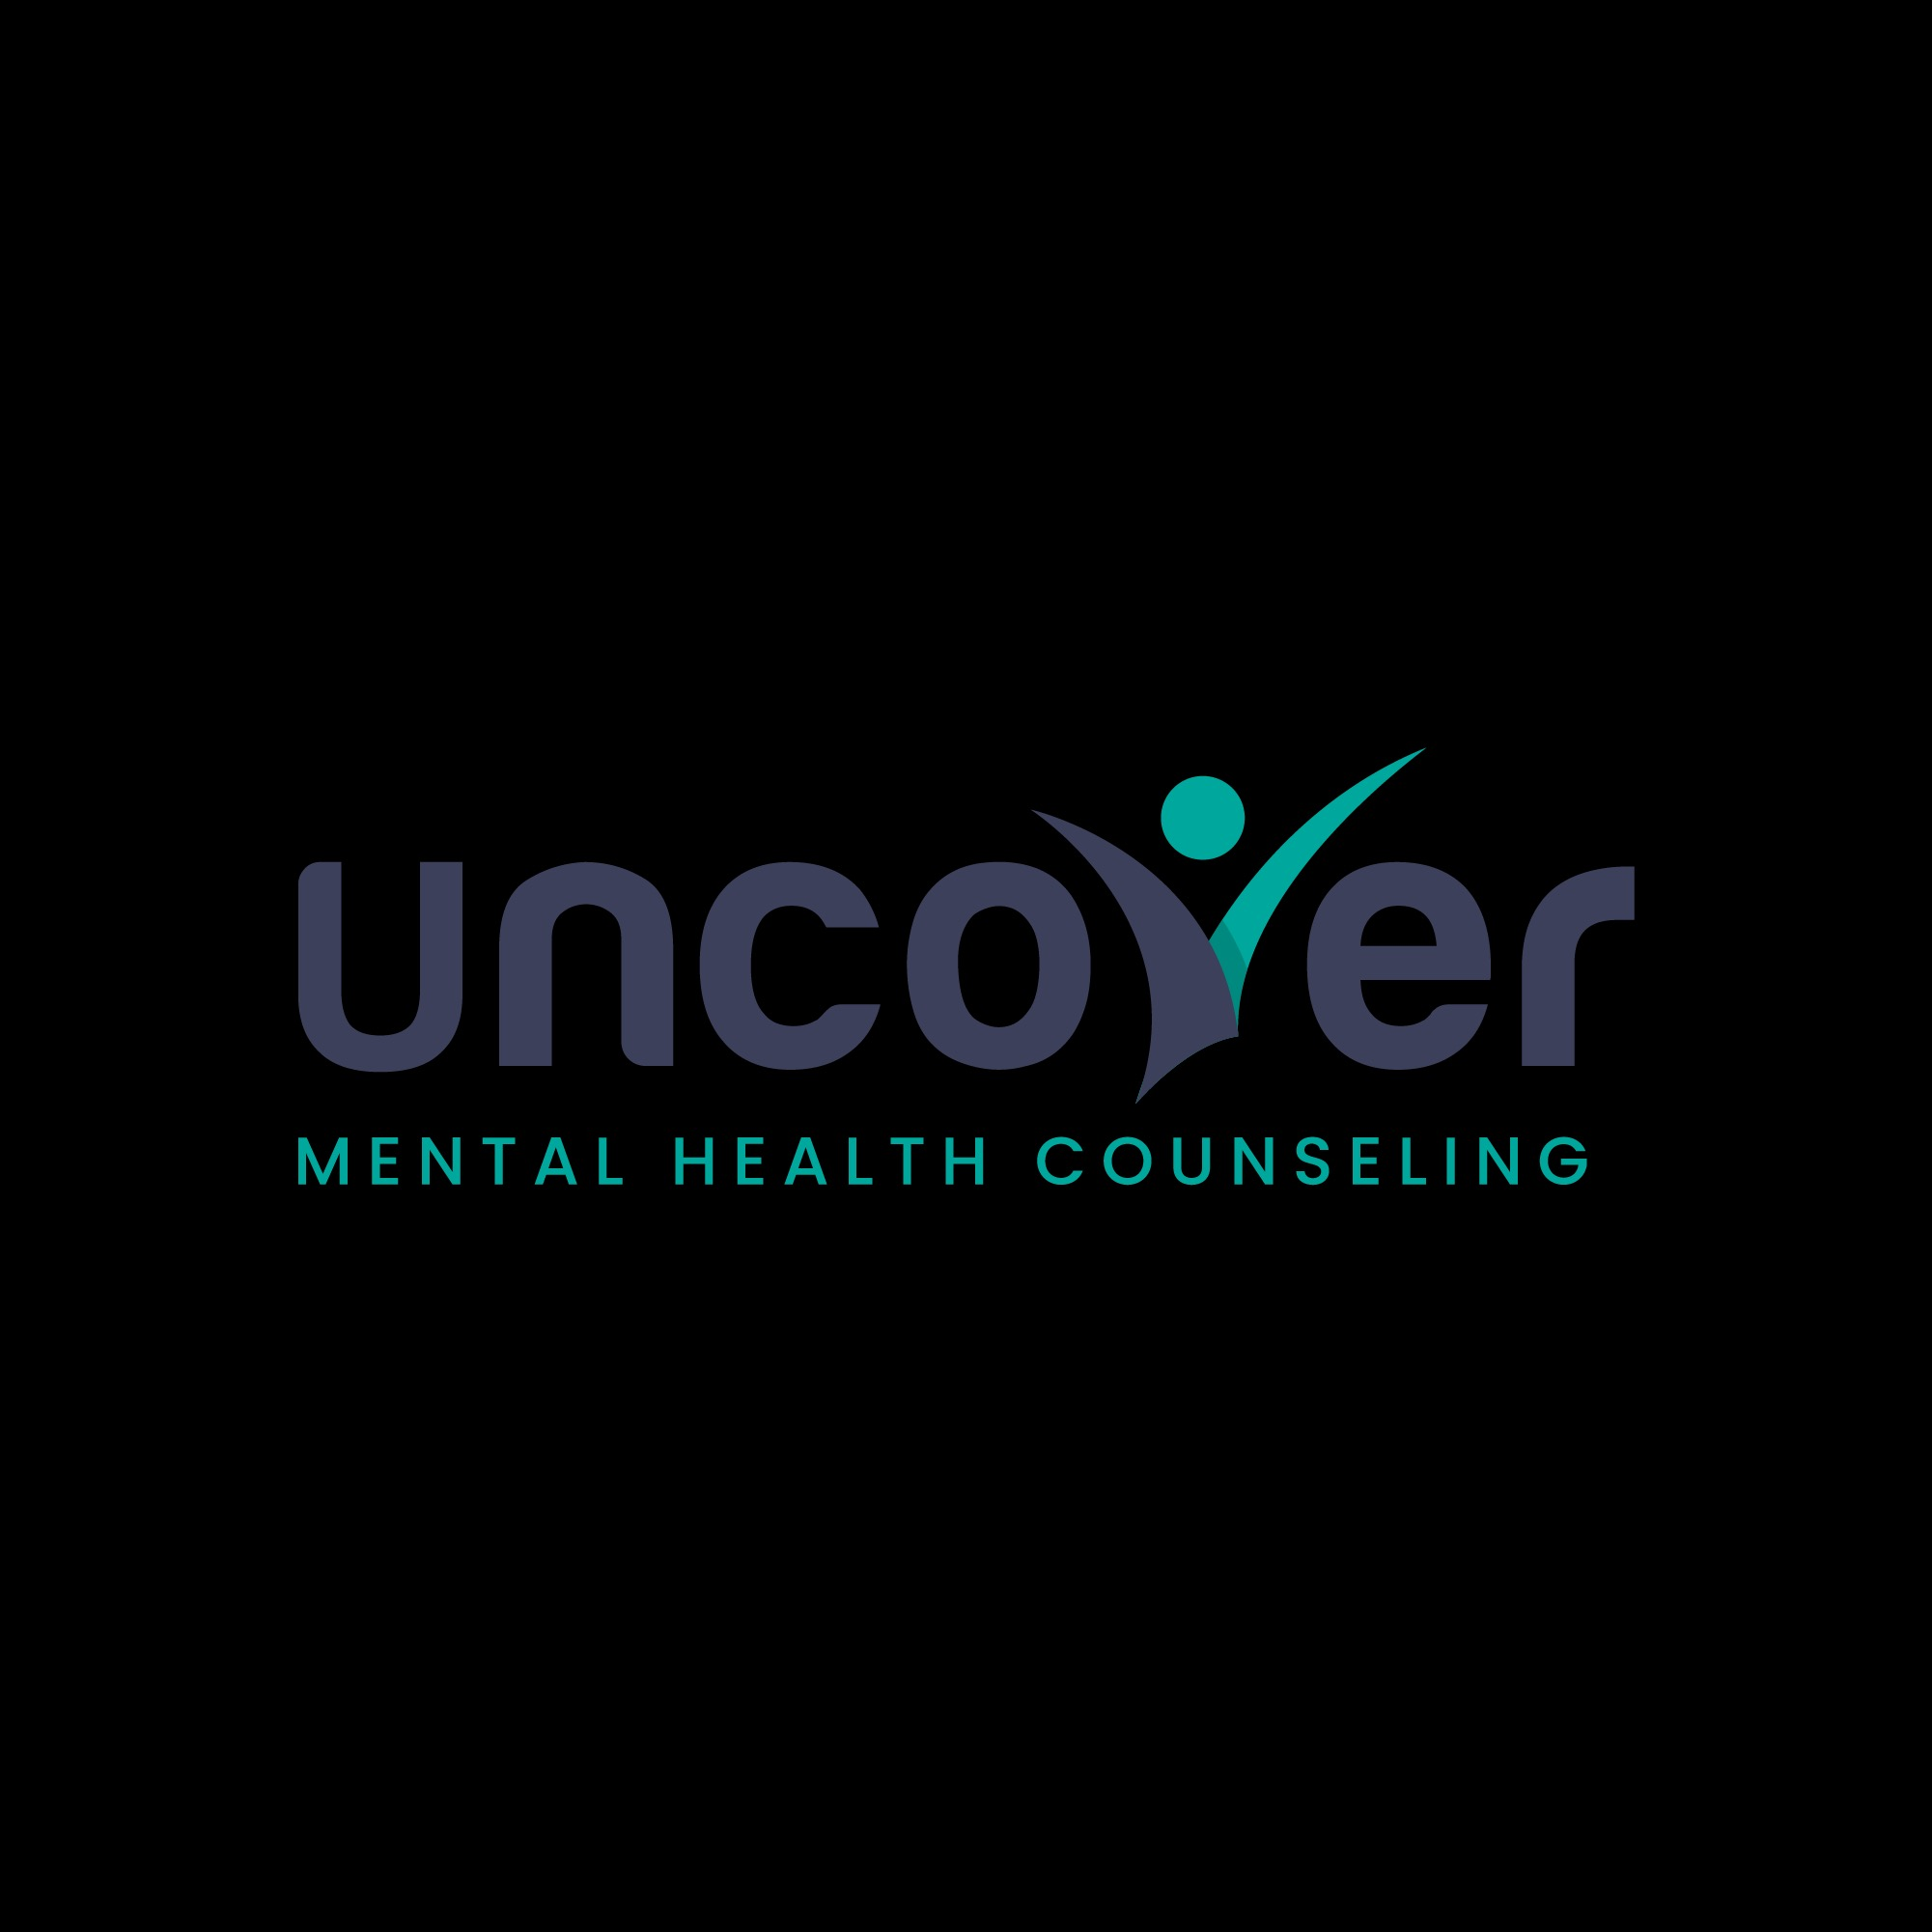 Uncover Mental Health Counseling PLLC - New York, NY 10017 - (646)868-8480 | ShowMeLocal.com